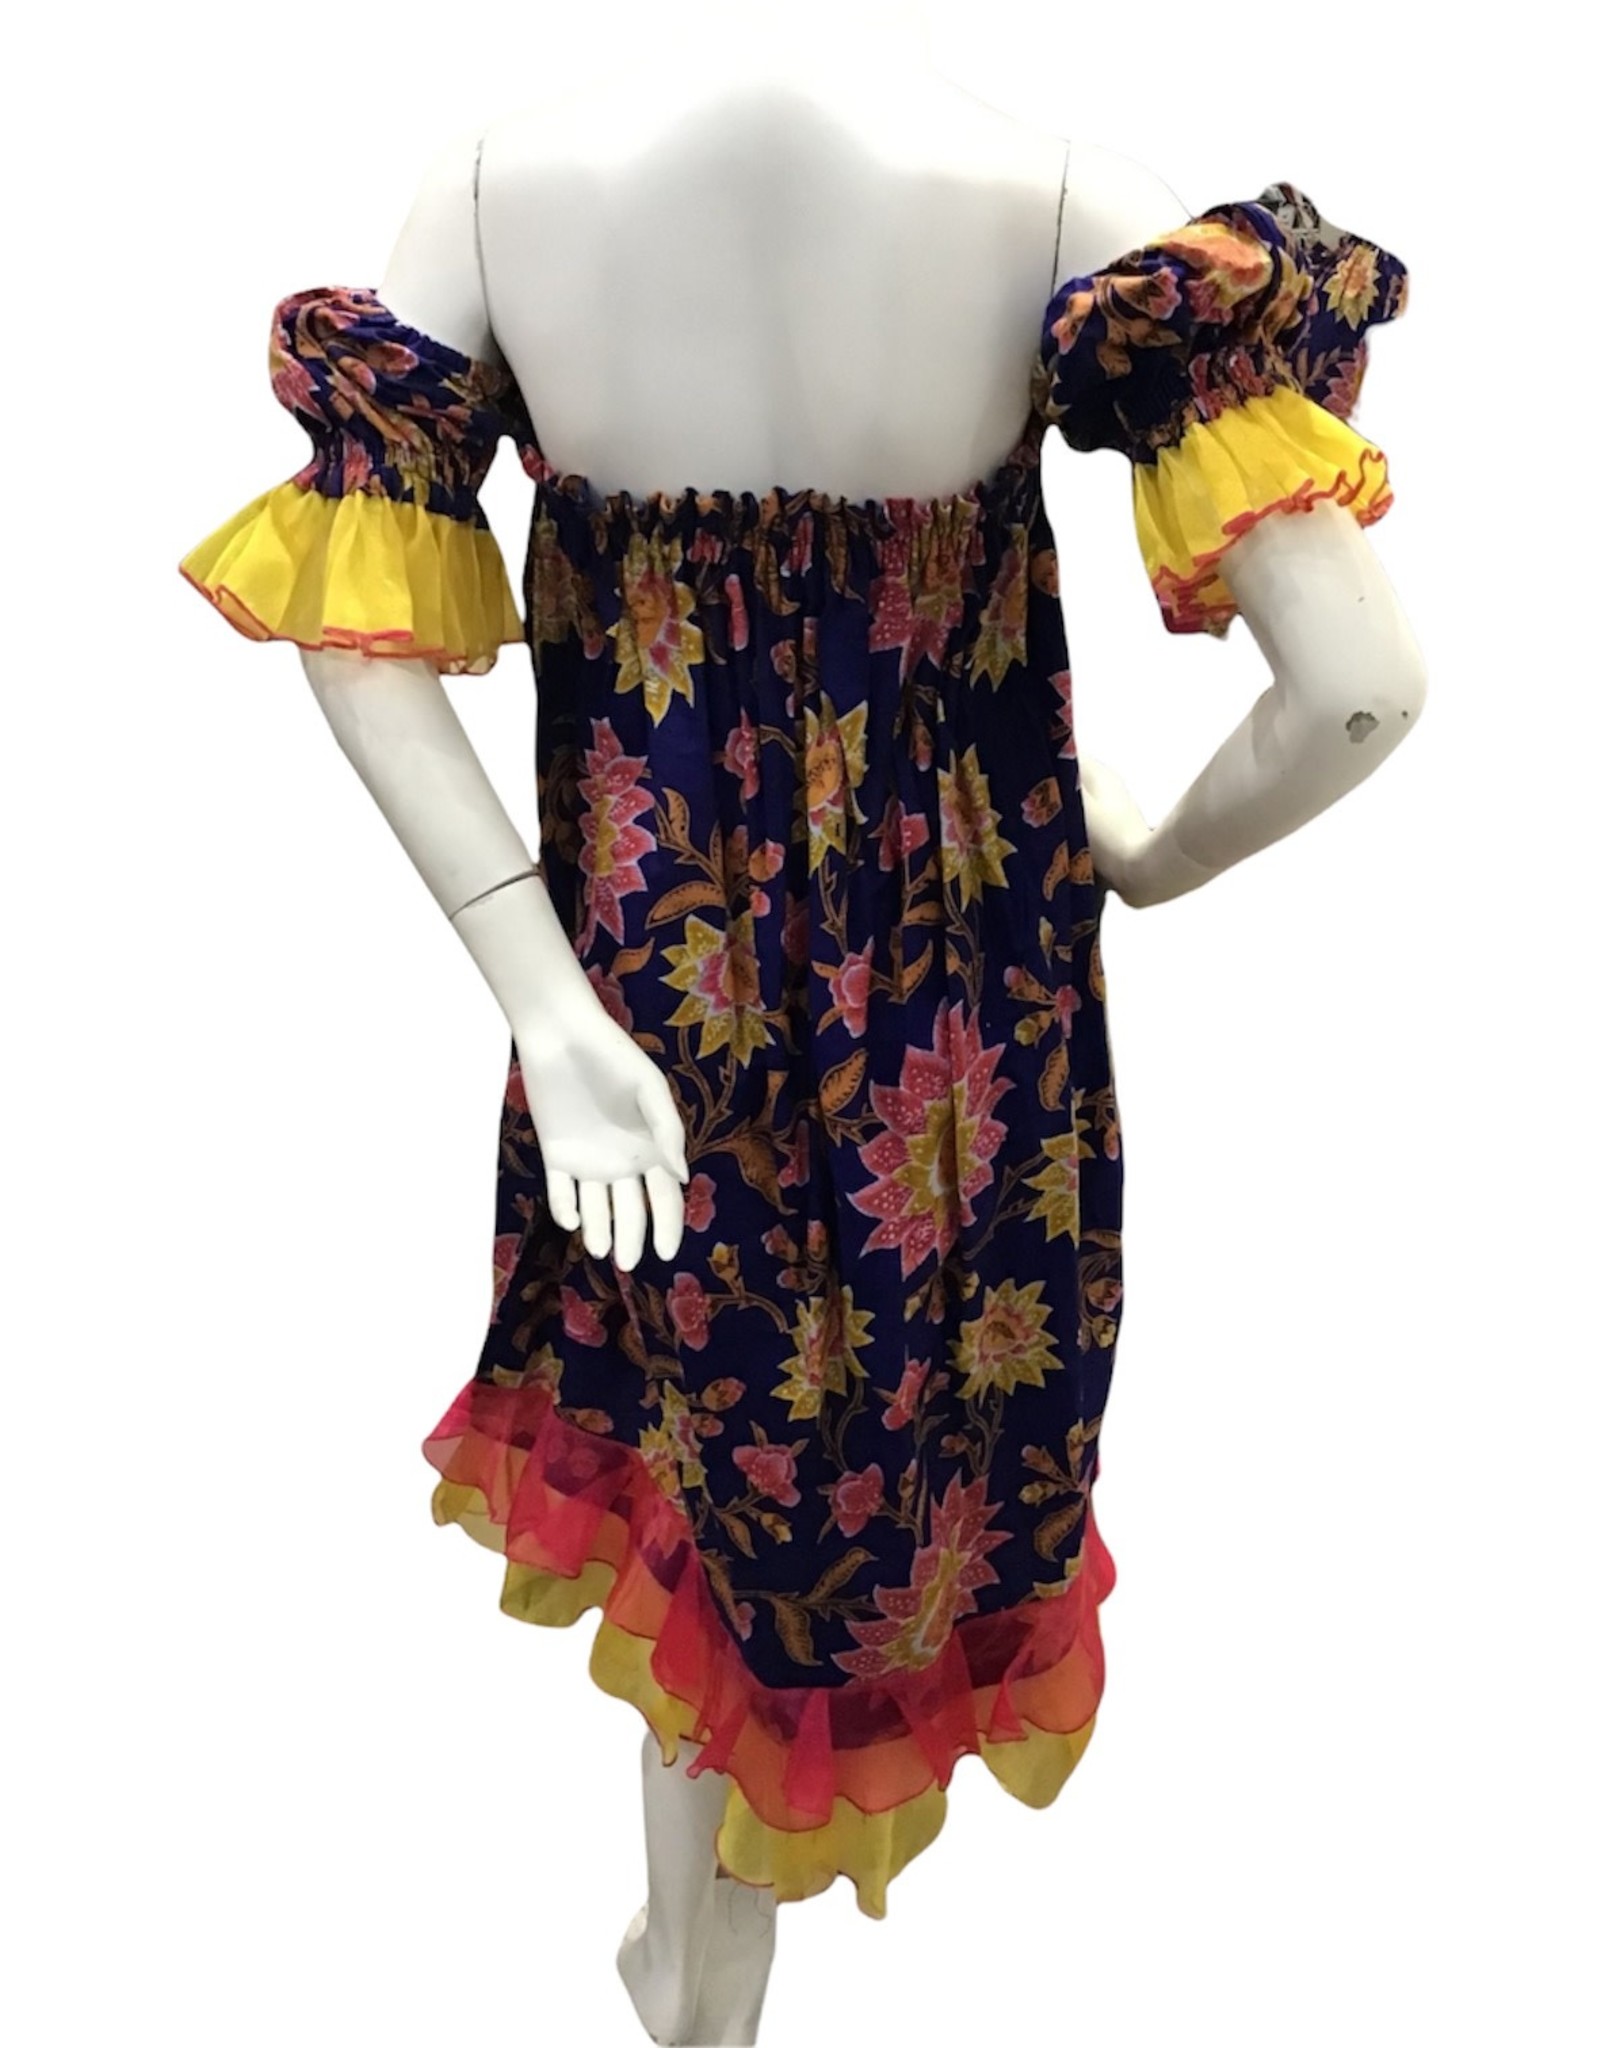 90's floral babydoll with sheer ruffles